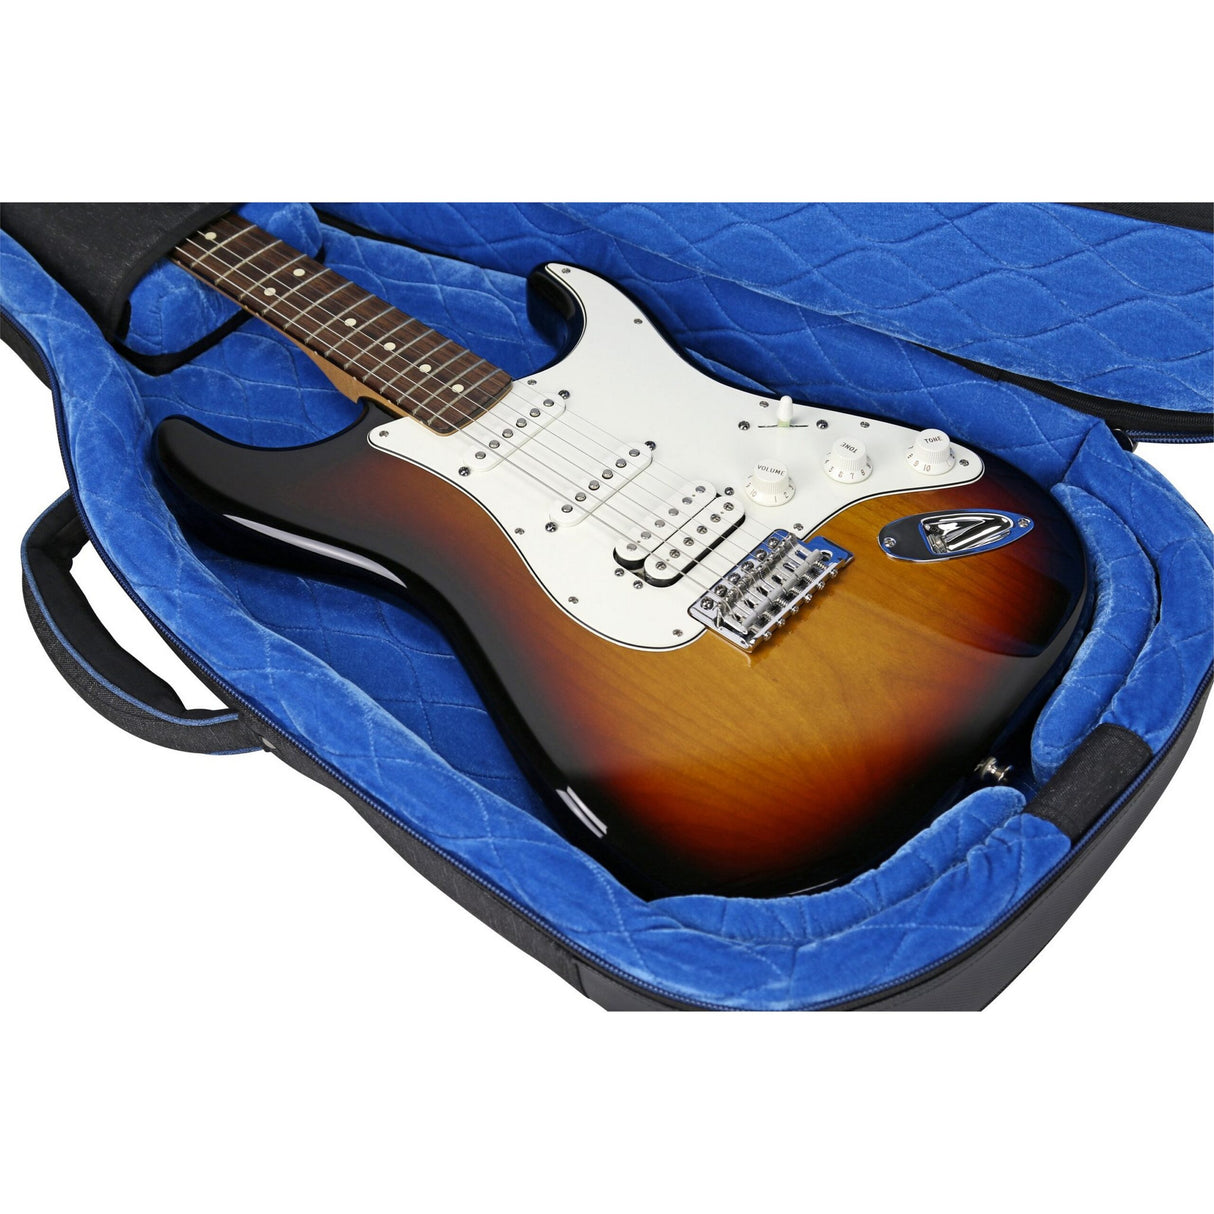 Reunion Blues RBCE1 RB Continental Voyager Electric Guitar Case